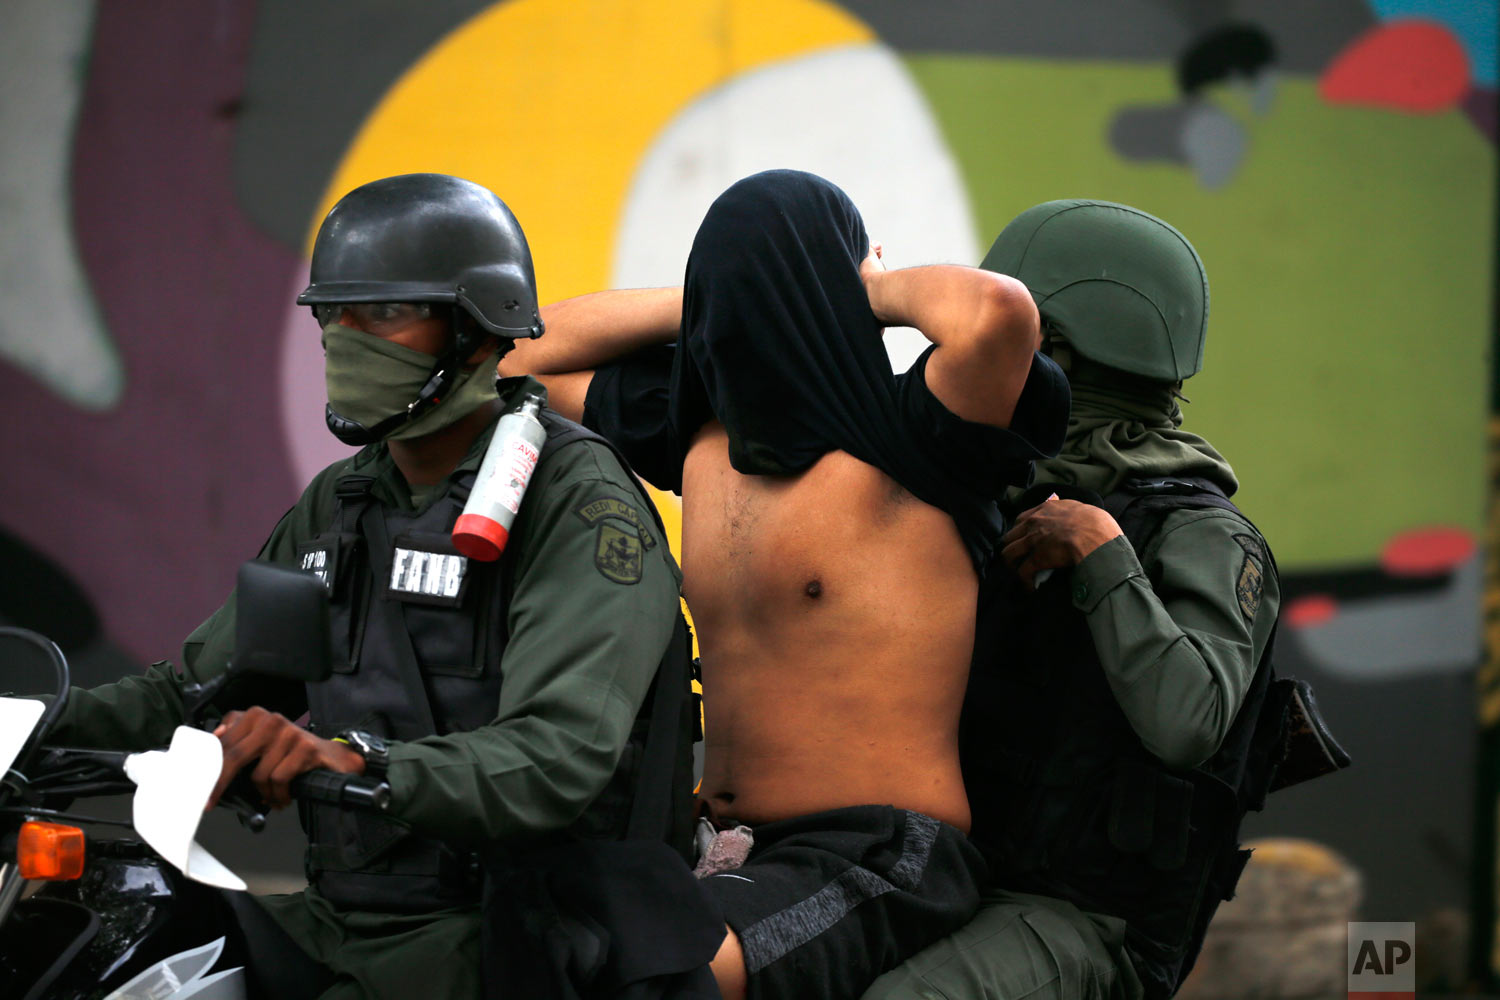  National Guard soldiers detain an anti-government protester, whose face they covered, after a rally demanding the resignation of President Nicolas Maduro in Caracas, Venezuela, Jan. 23, 2019. (AP Photo/Fernando Llano) 